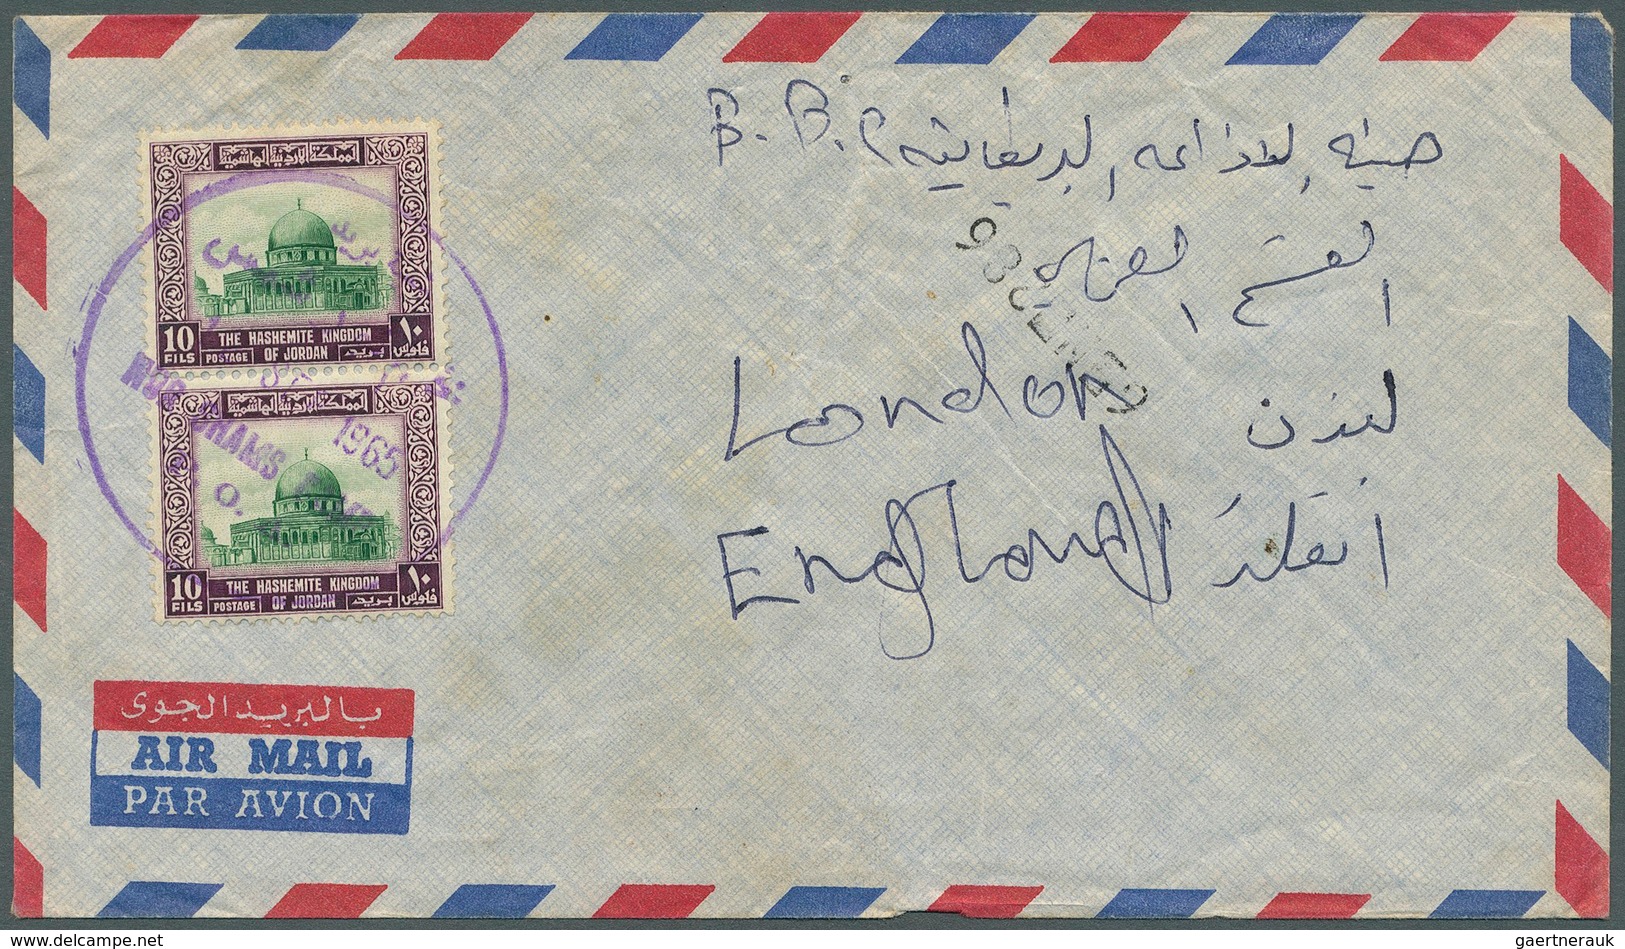 Jordanien: 1948 - 1979, 37 covers, nice collection of covers and some postal stationery, good franki